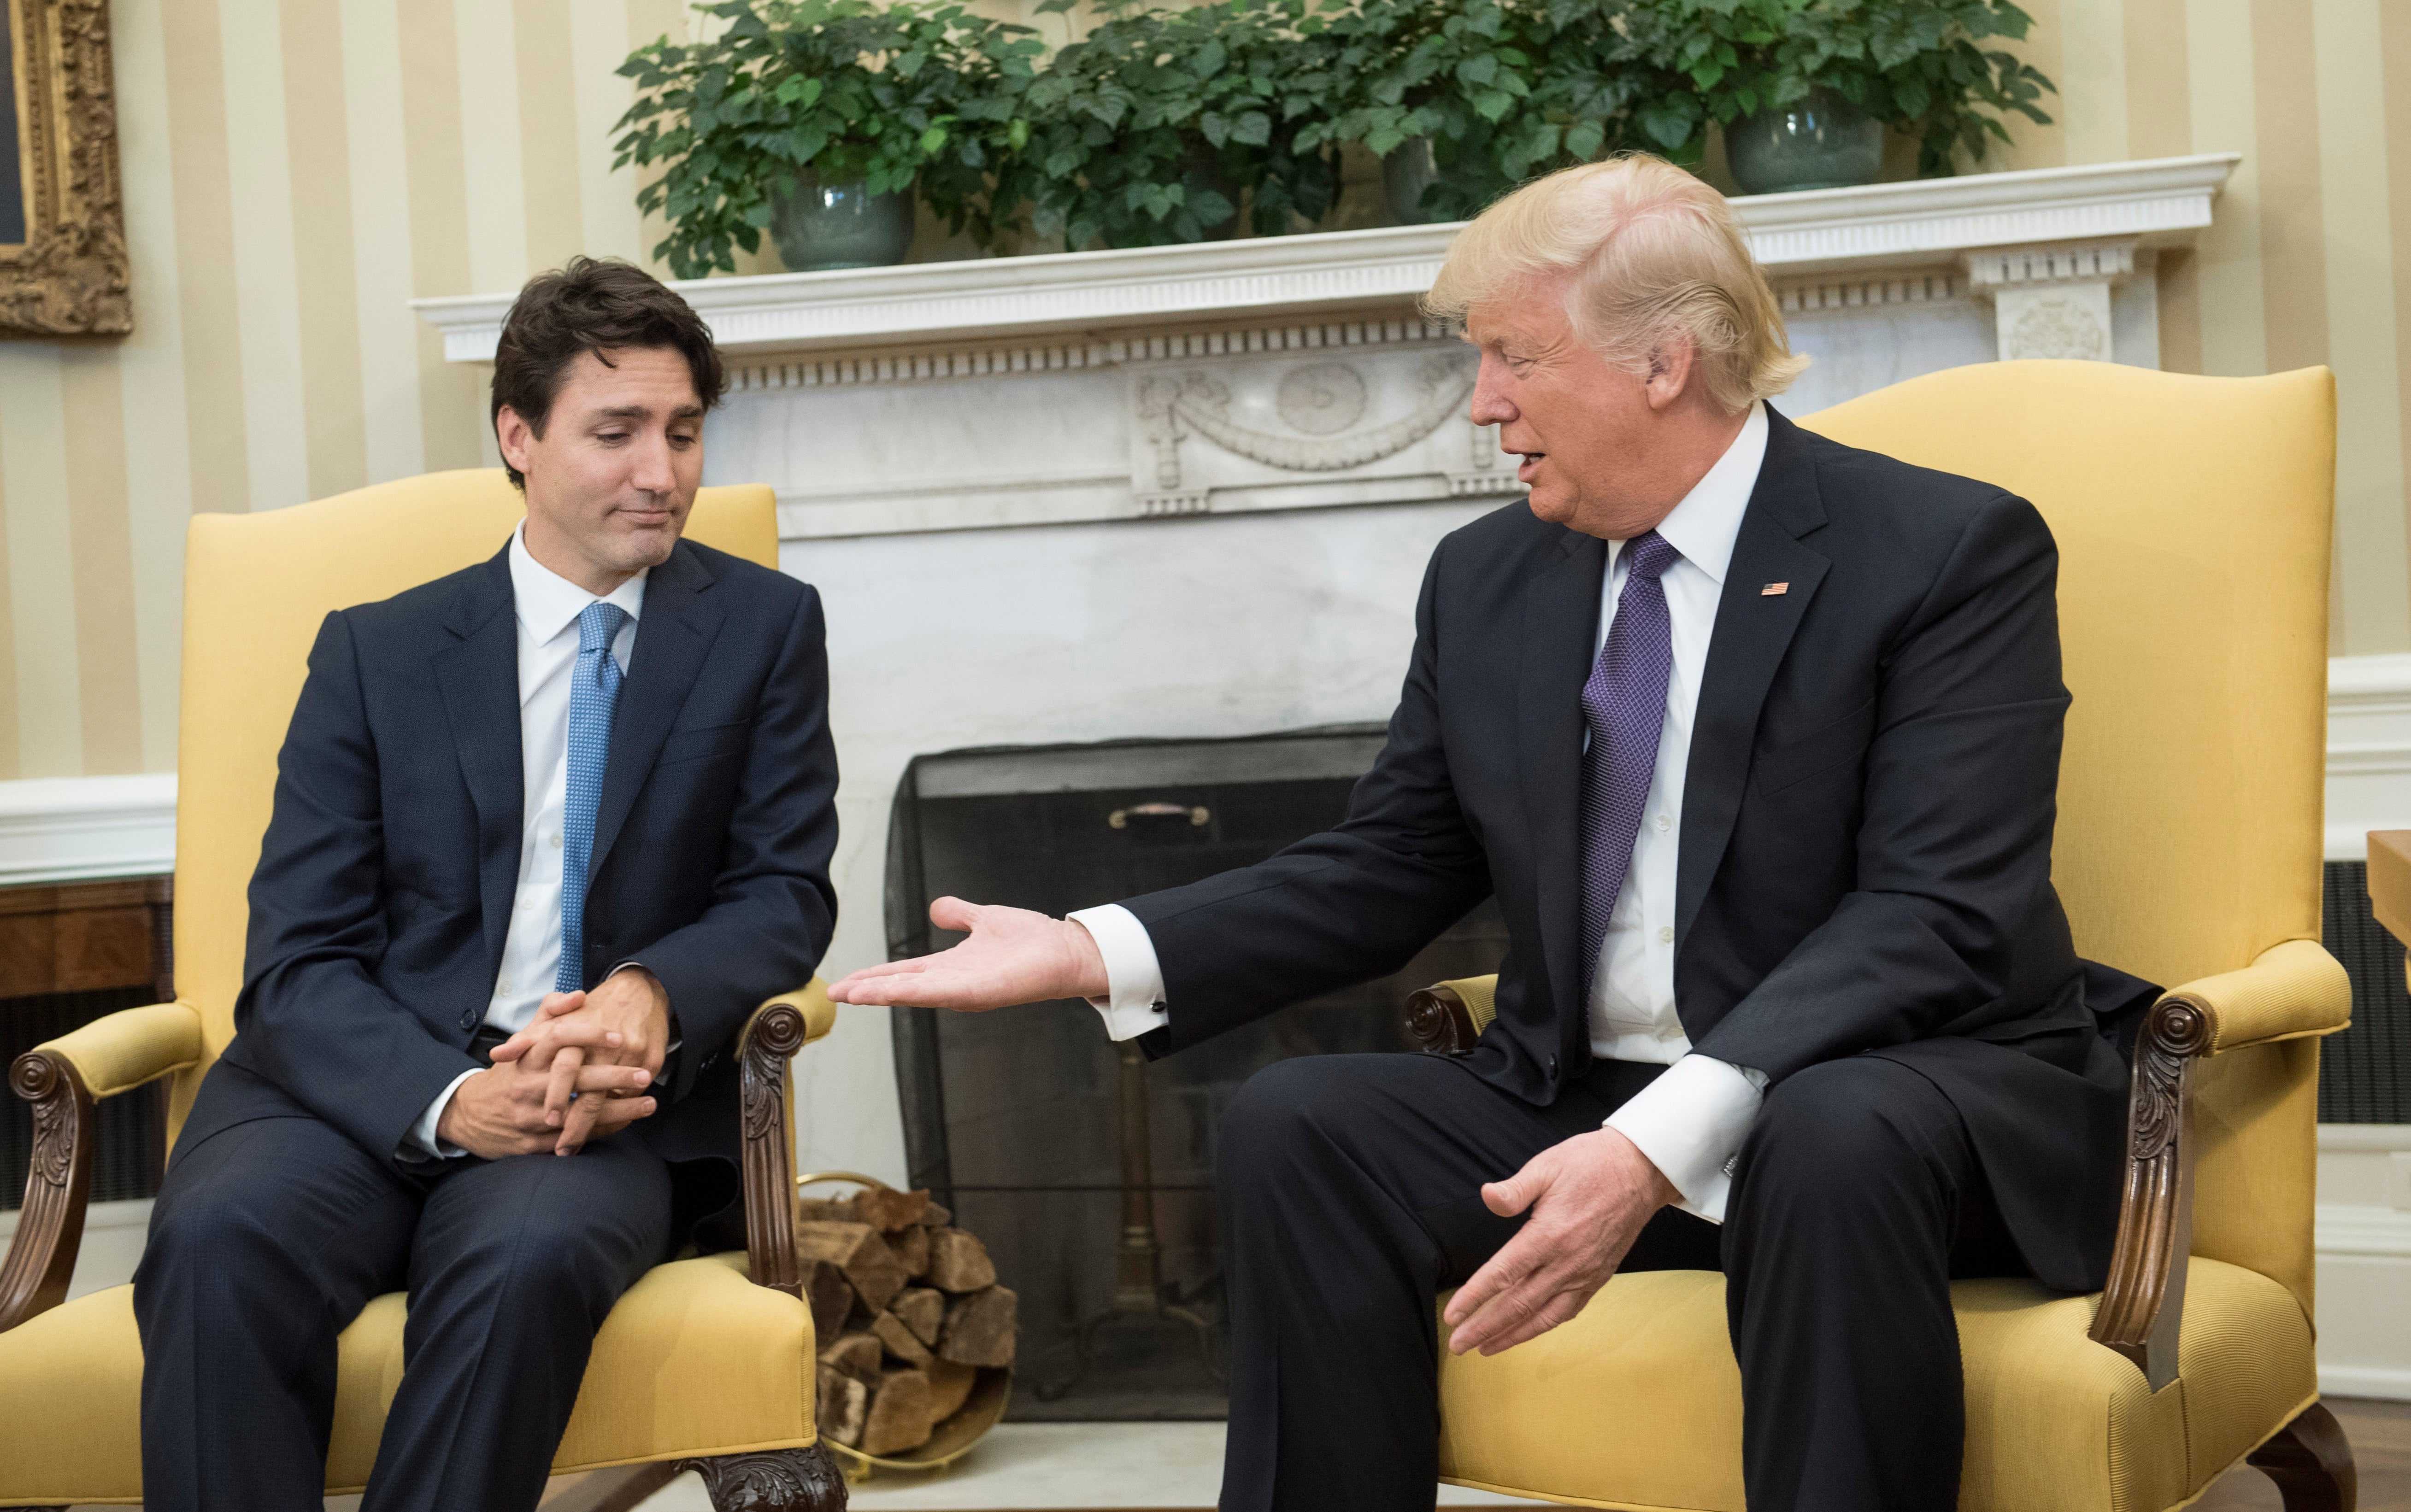 Justin Trudeau with Donald Trump in the Oval Office in February 2017